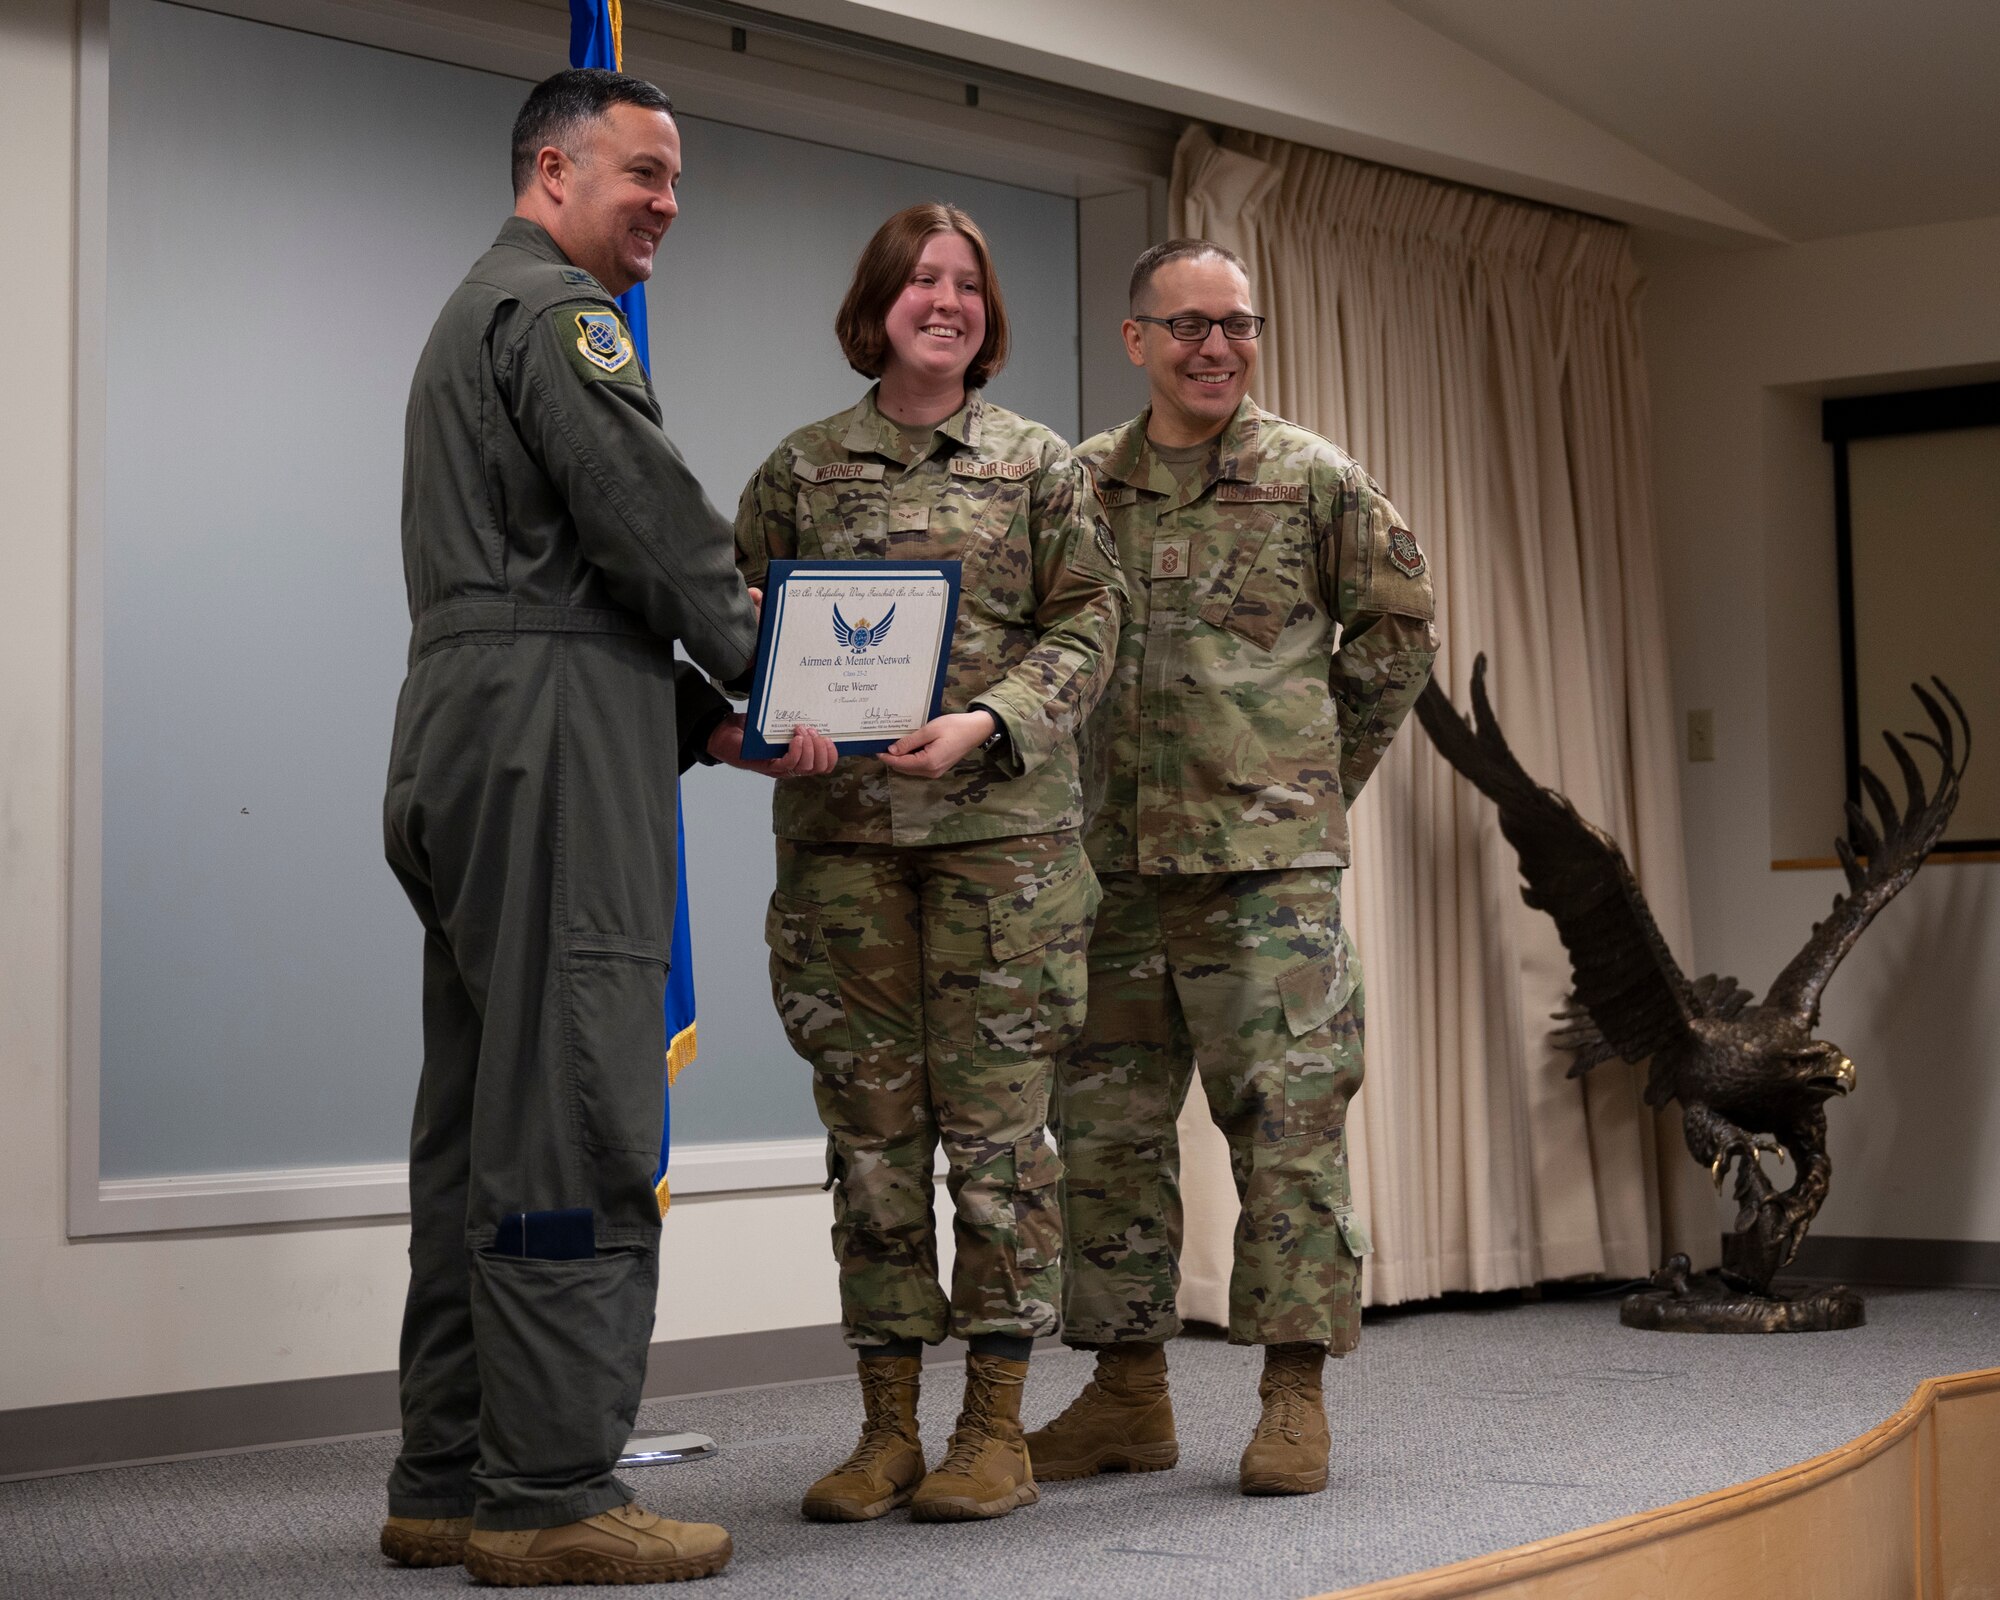 An Airman, deputy commander and command chief pose together with a certificate.